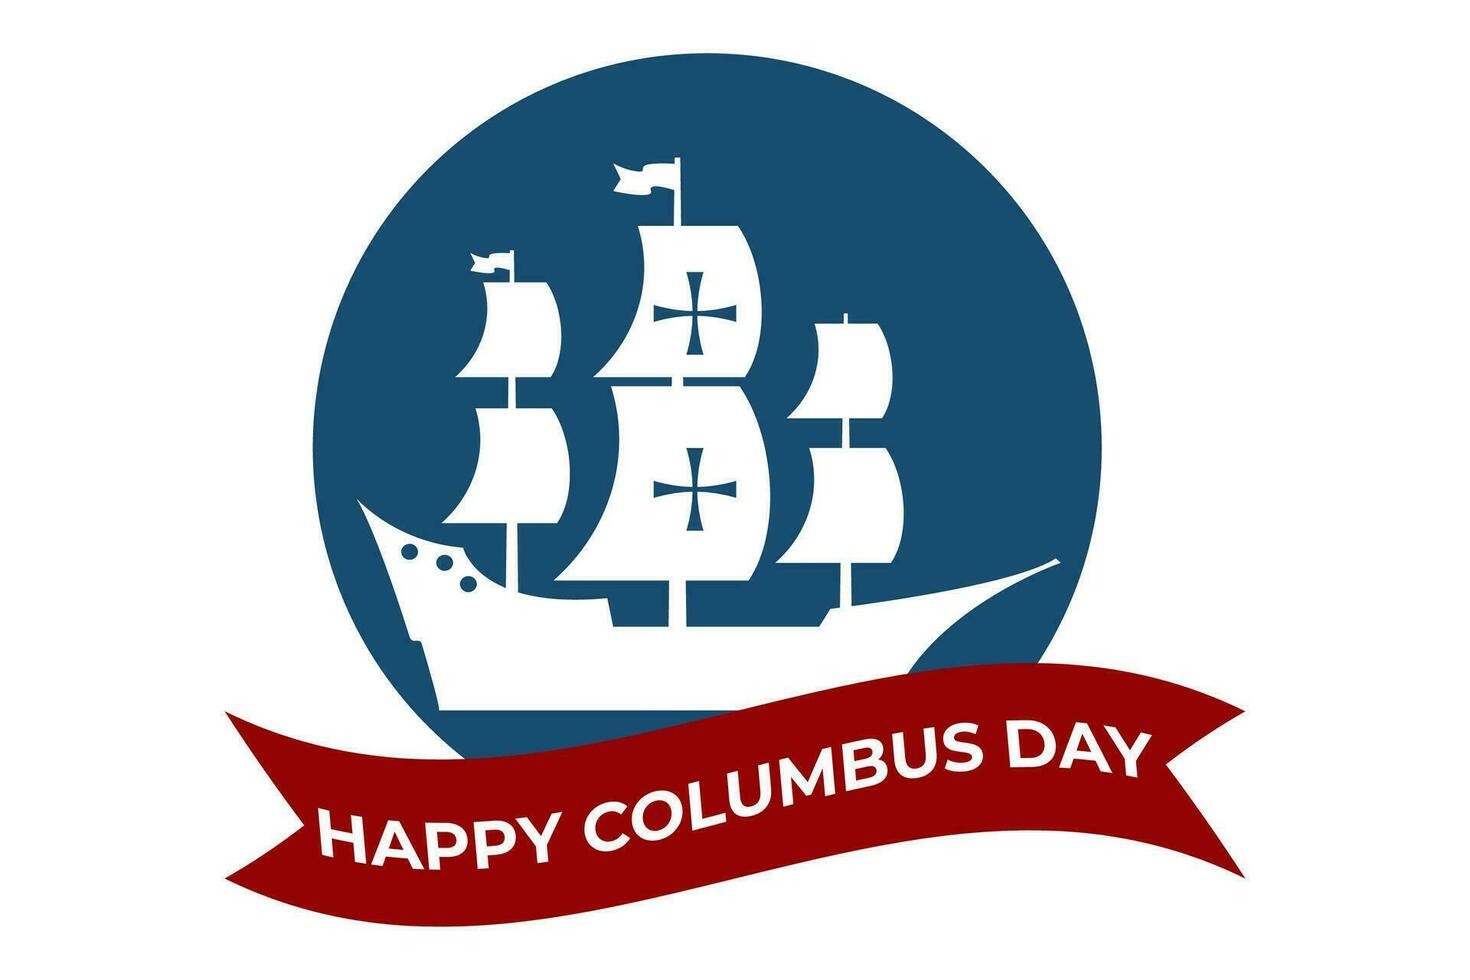 Columbus day background vectors with silhouette ship.